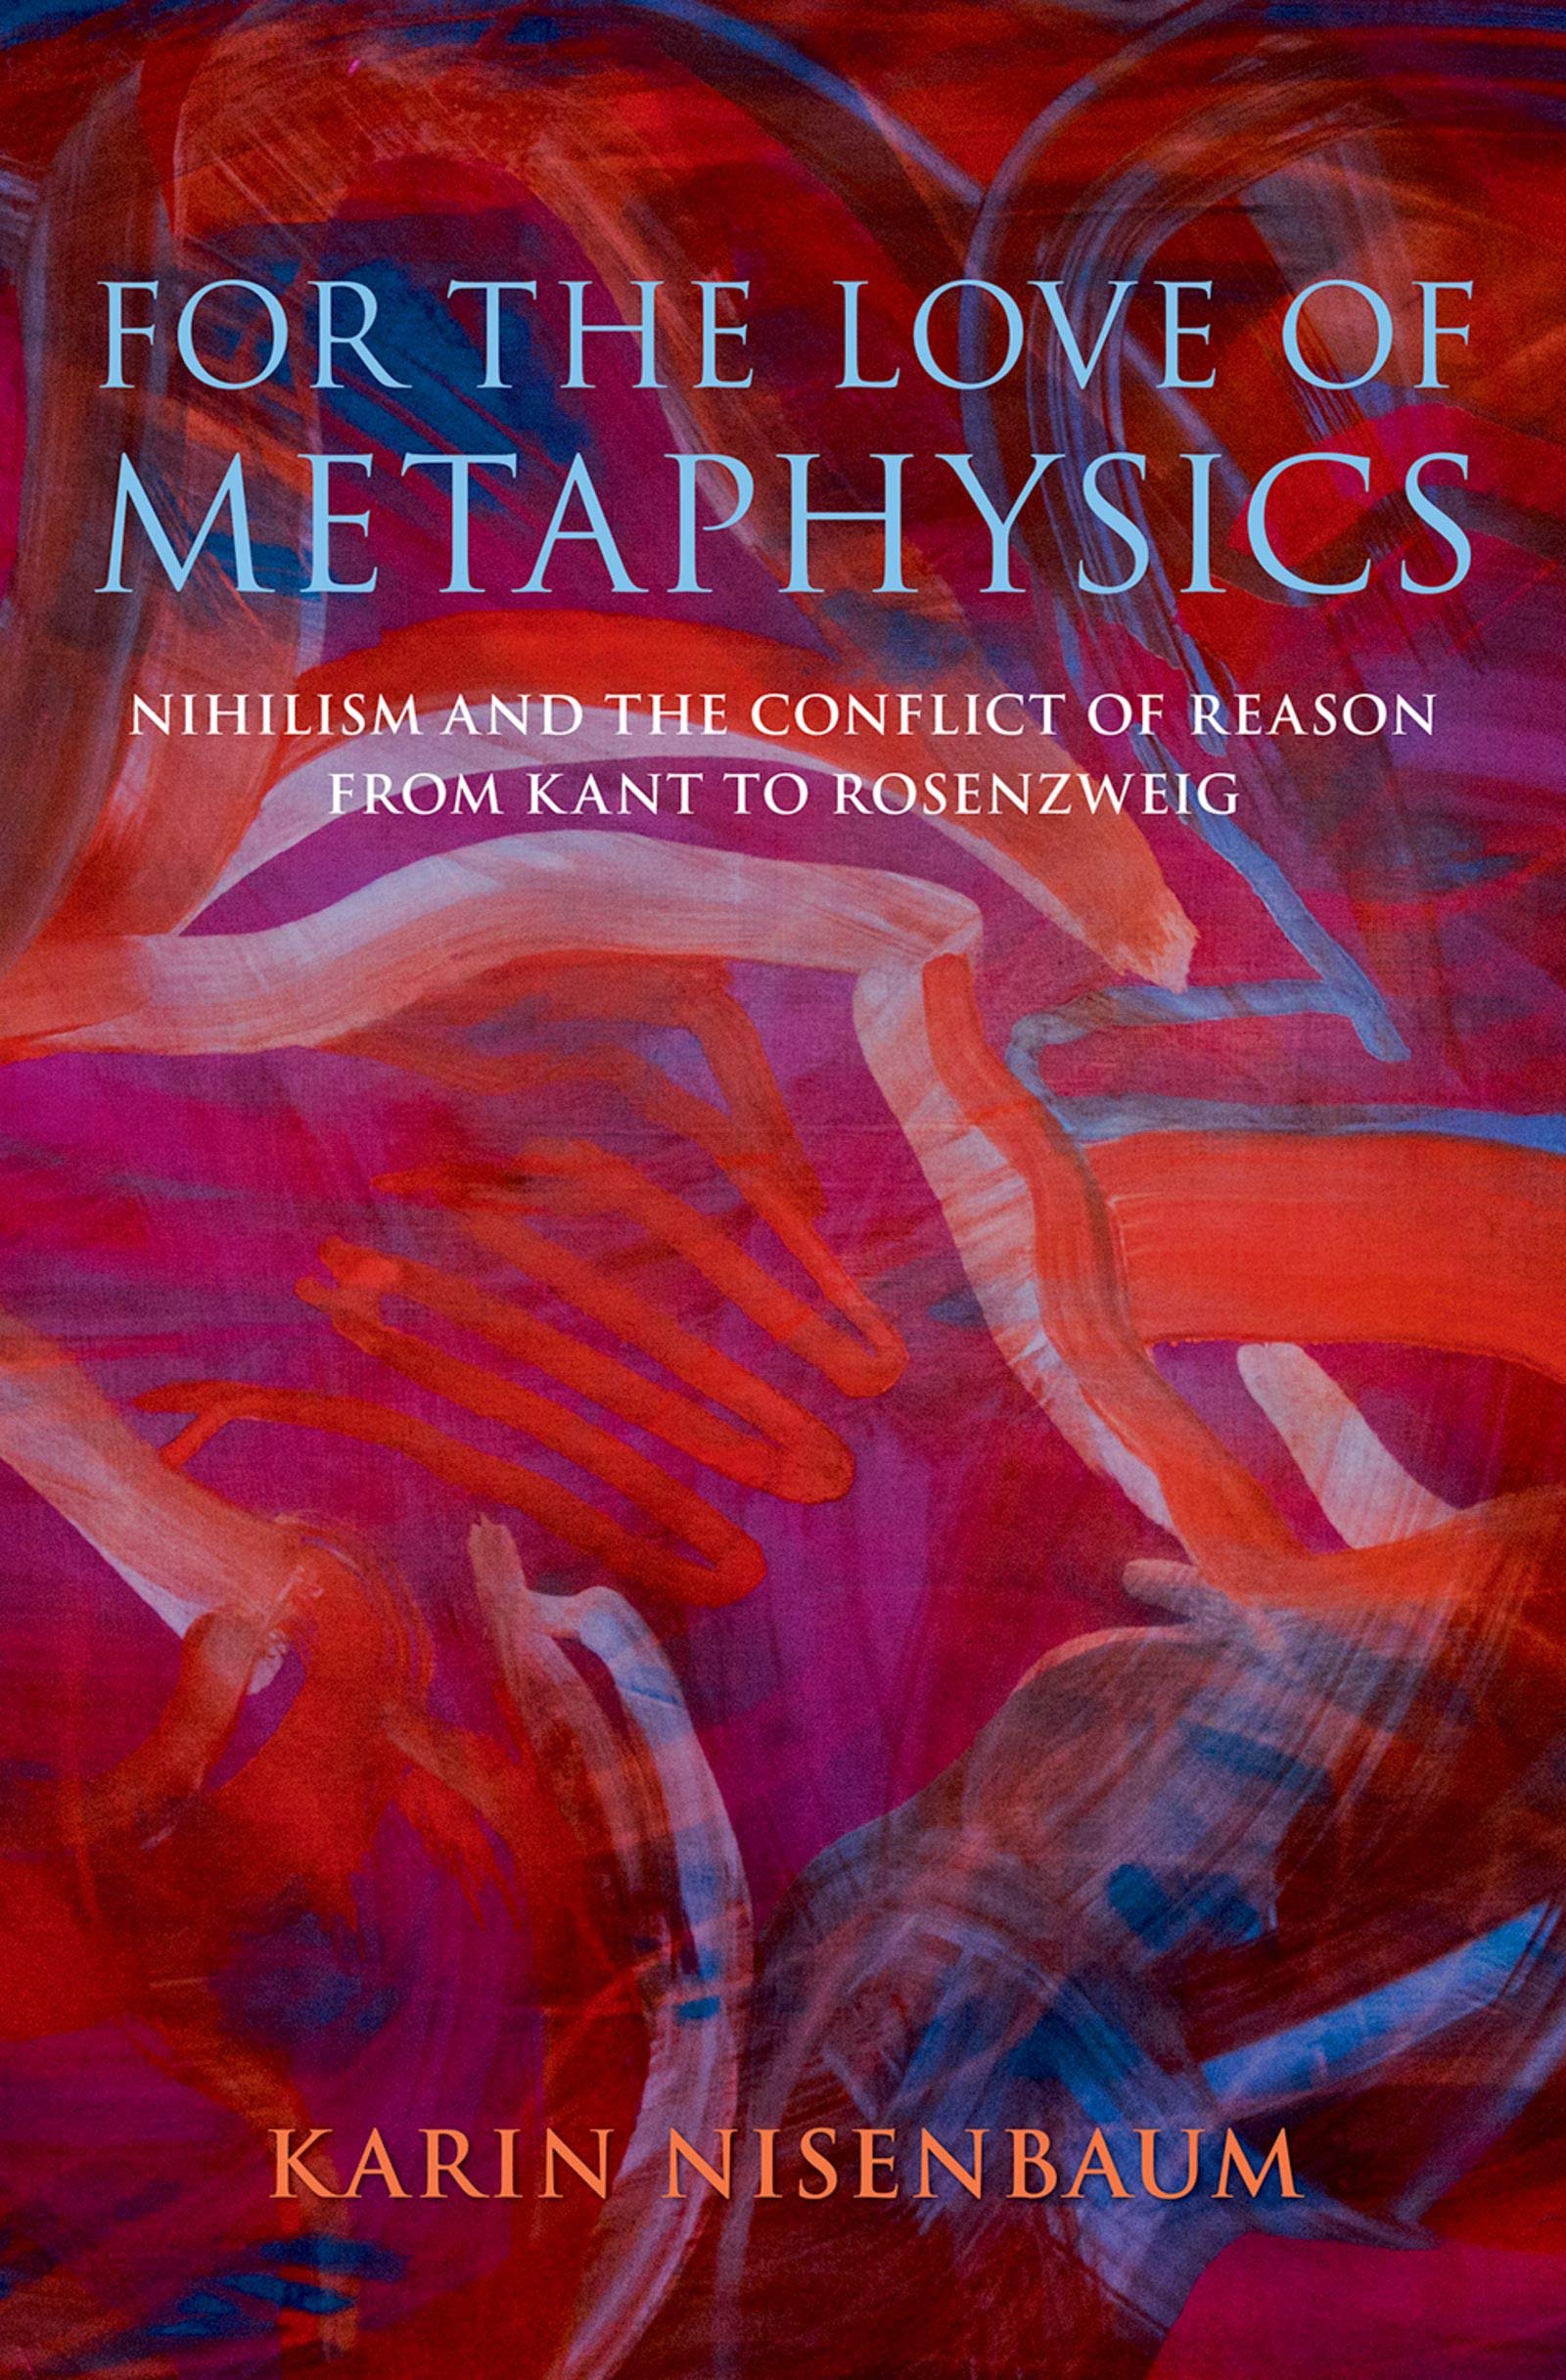 For the Love of Metaphysics: Nihilism and the Conflict of Reason from Kant to Rosenzweig